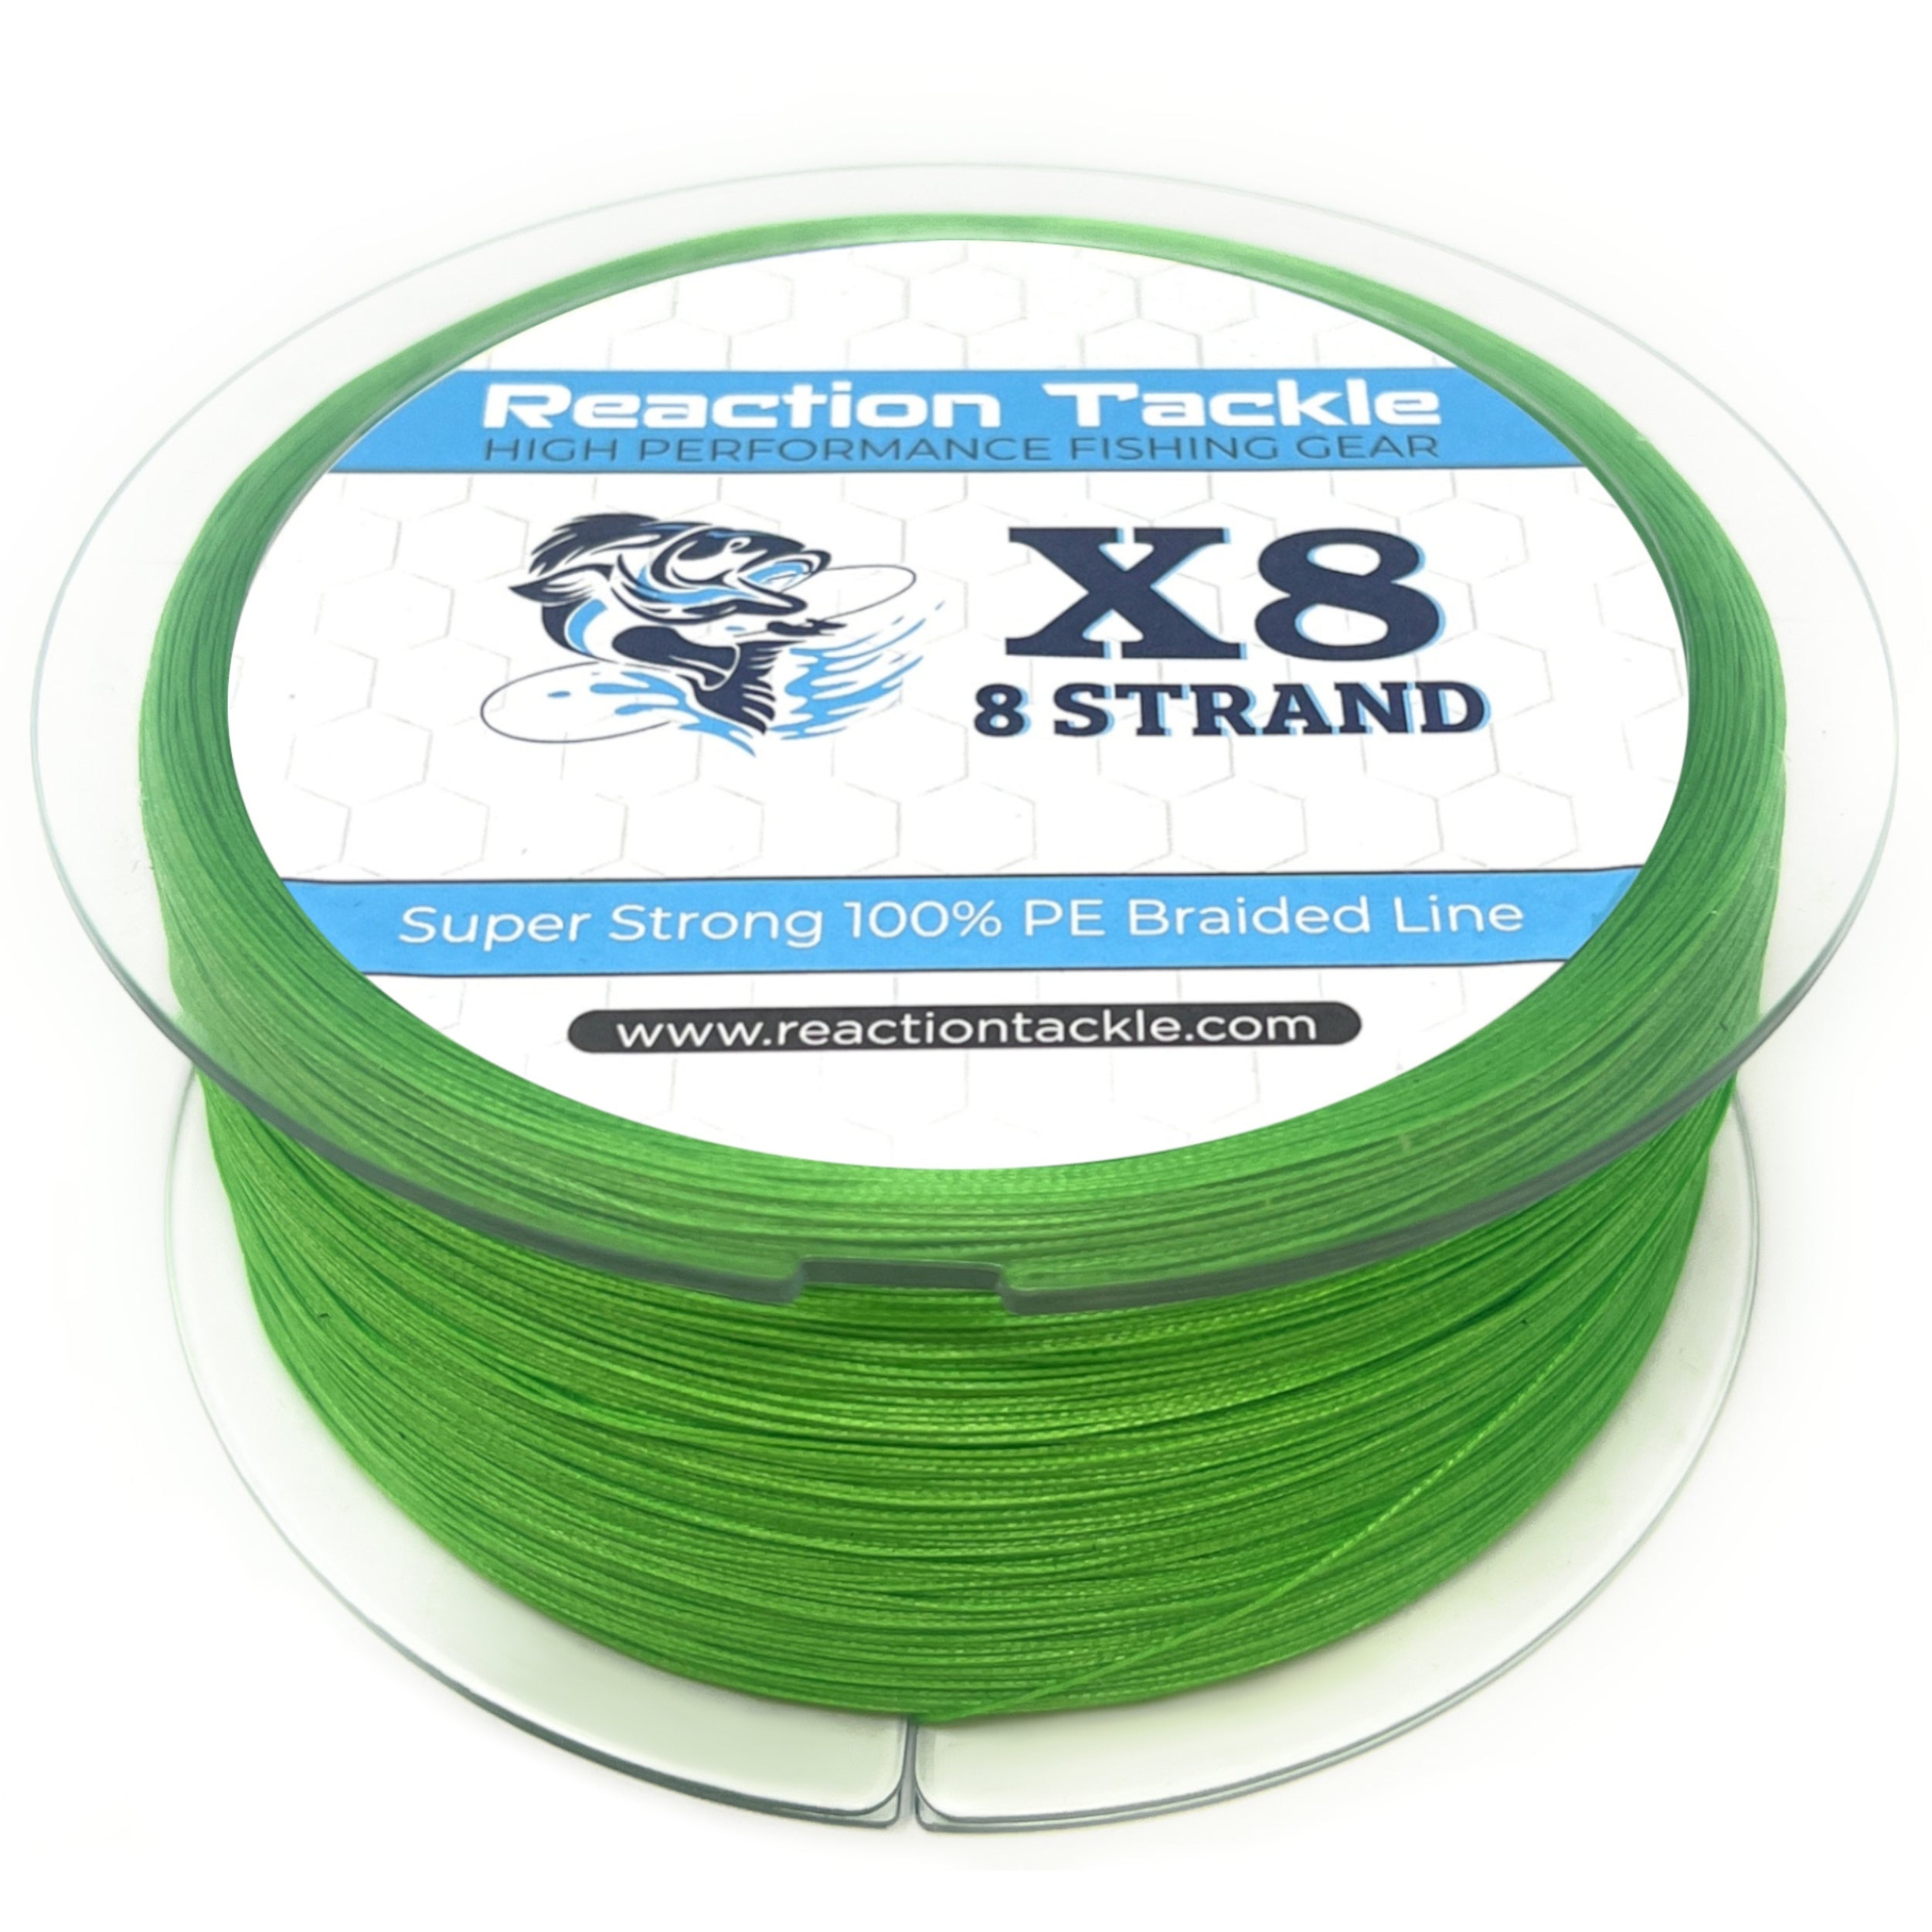 X8 Reaction Tackle Braided Fishing Line- Blue Camo 8 Strand